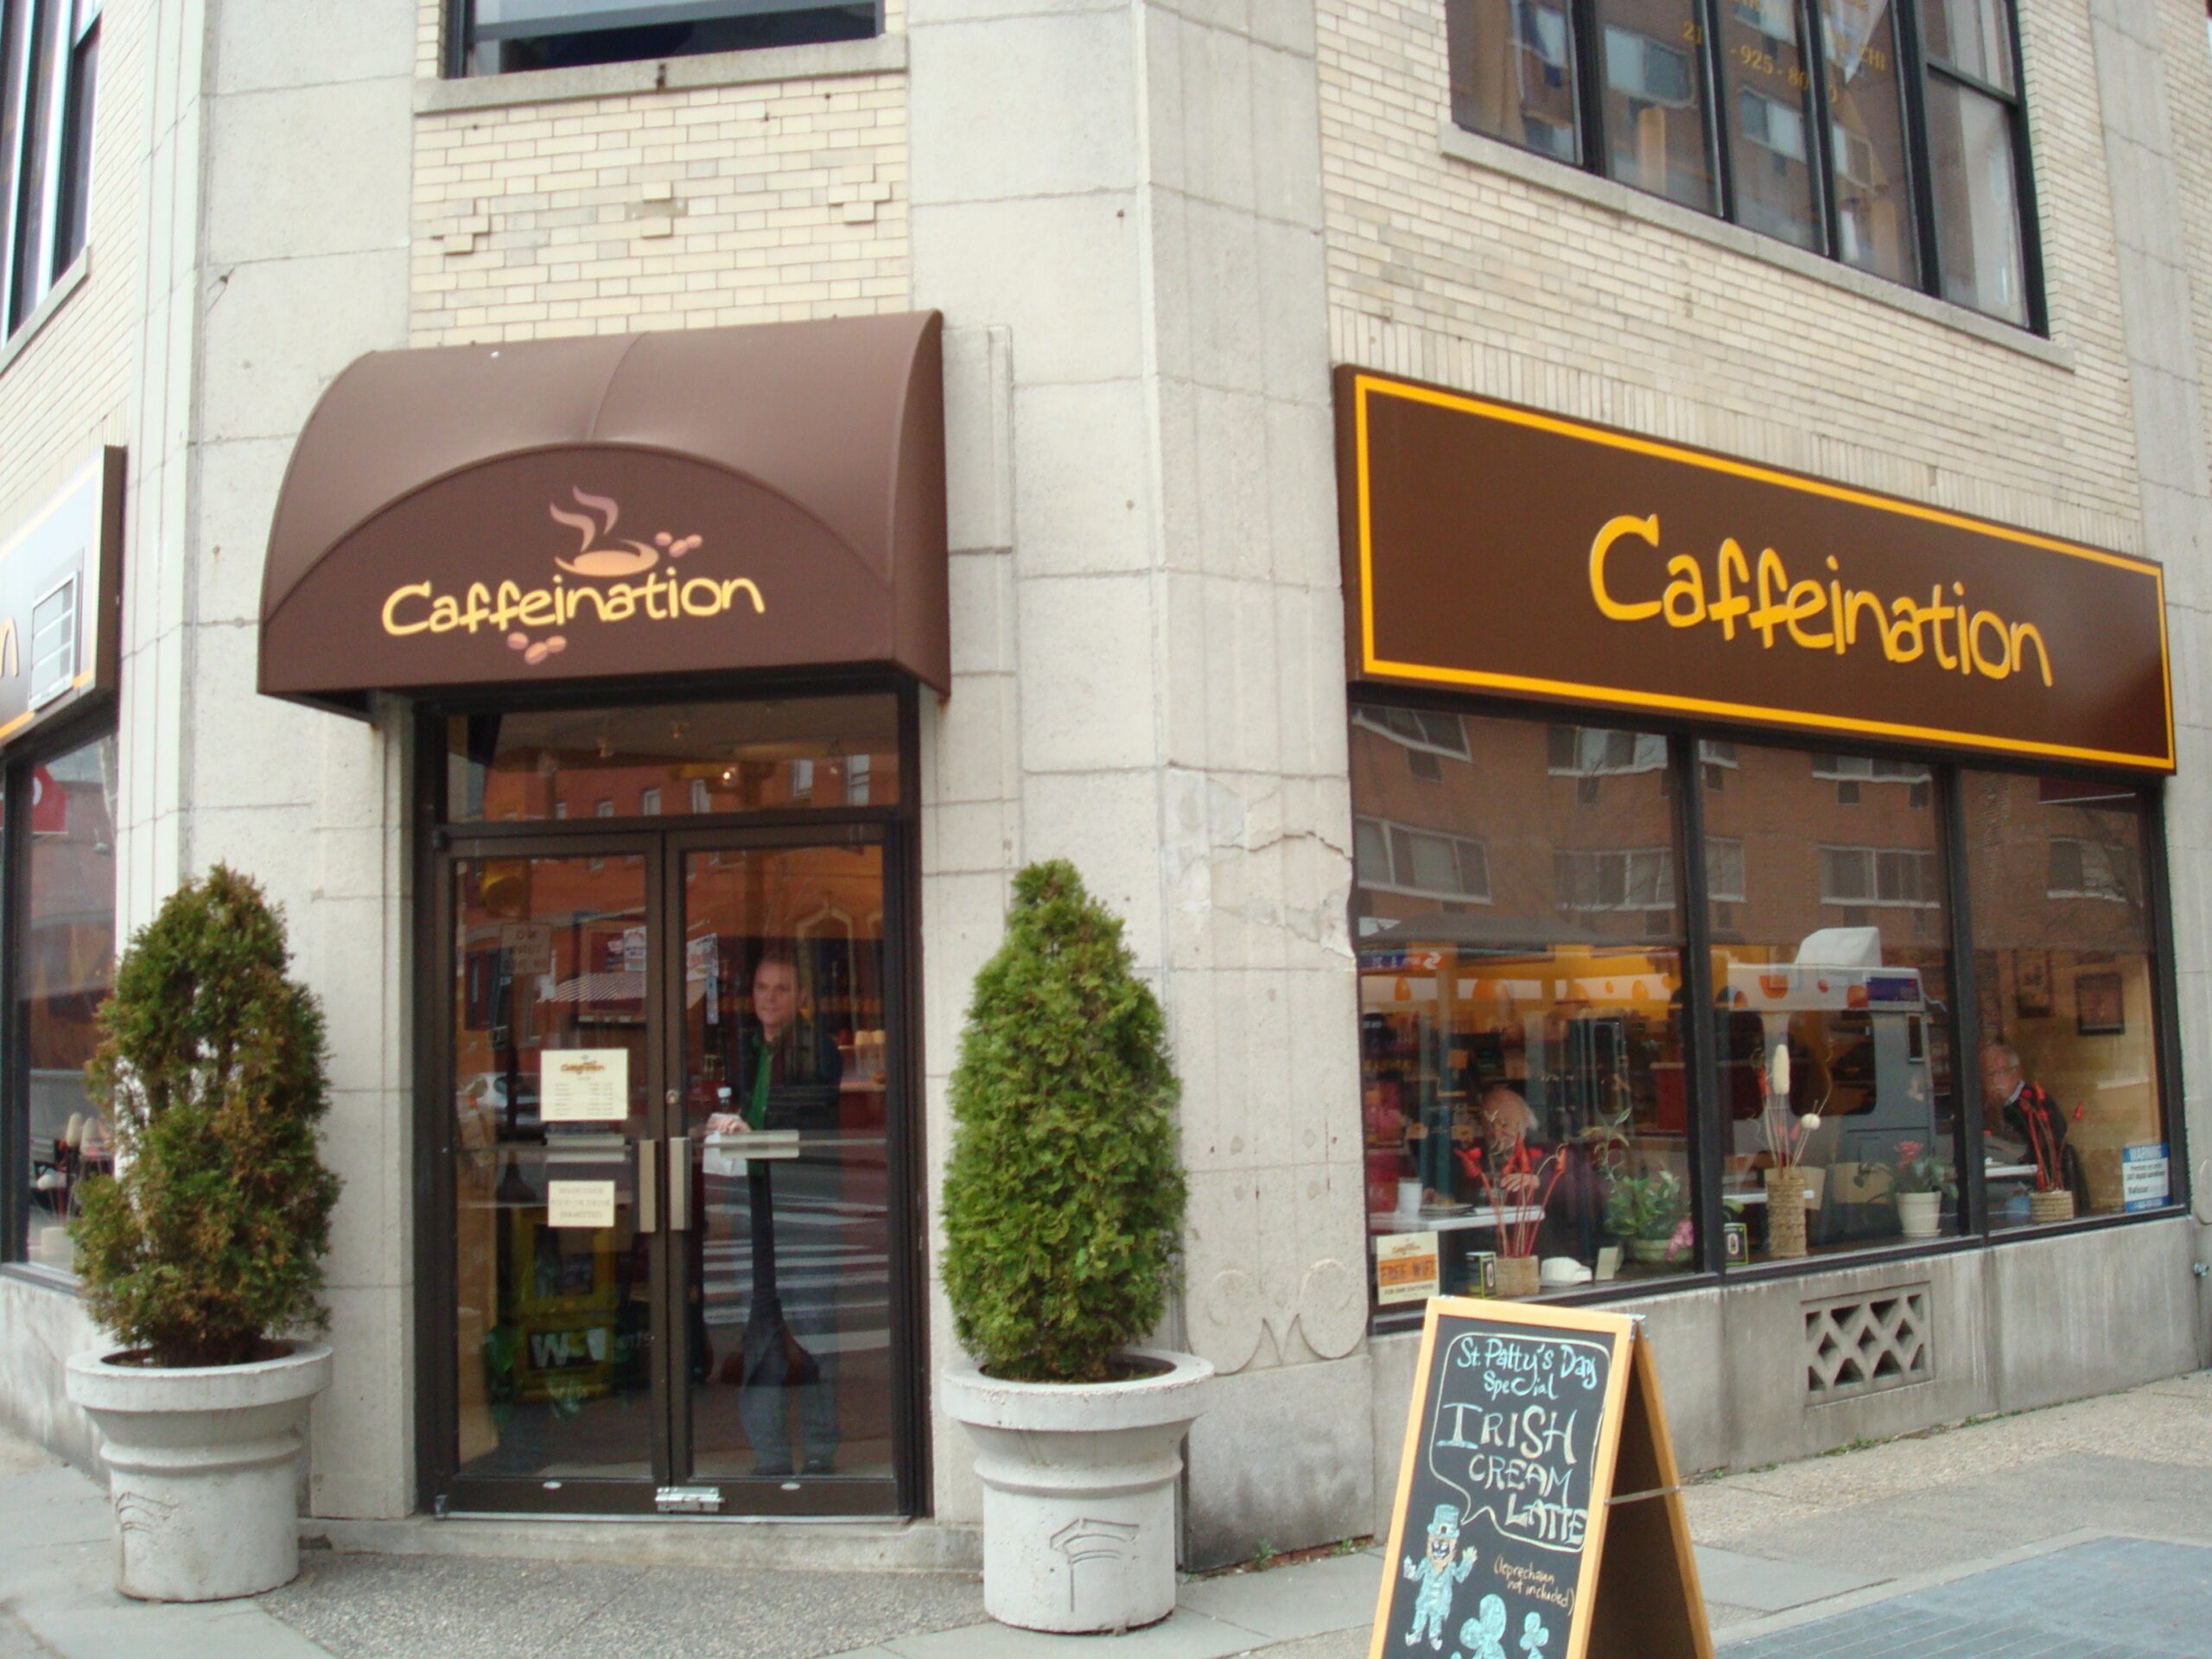 Caffeination awning and sign